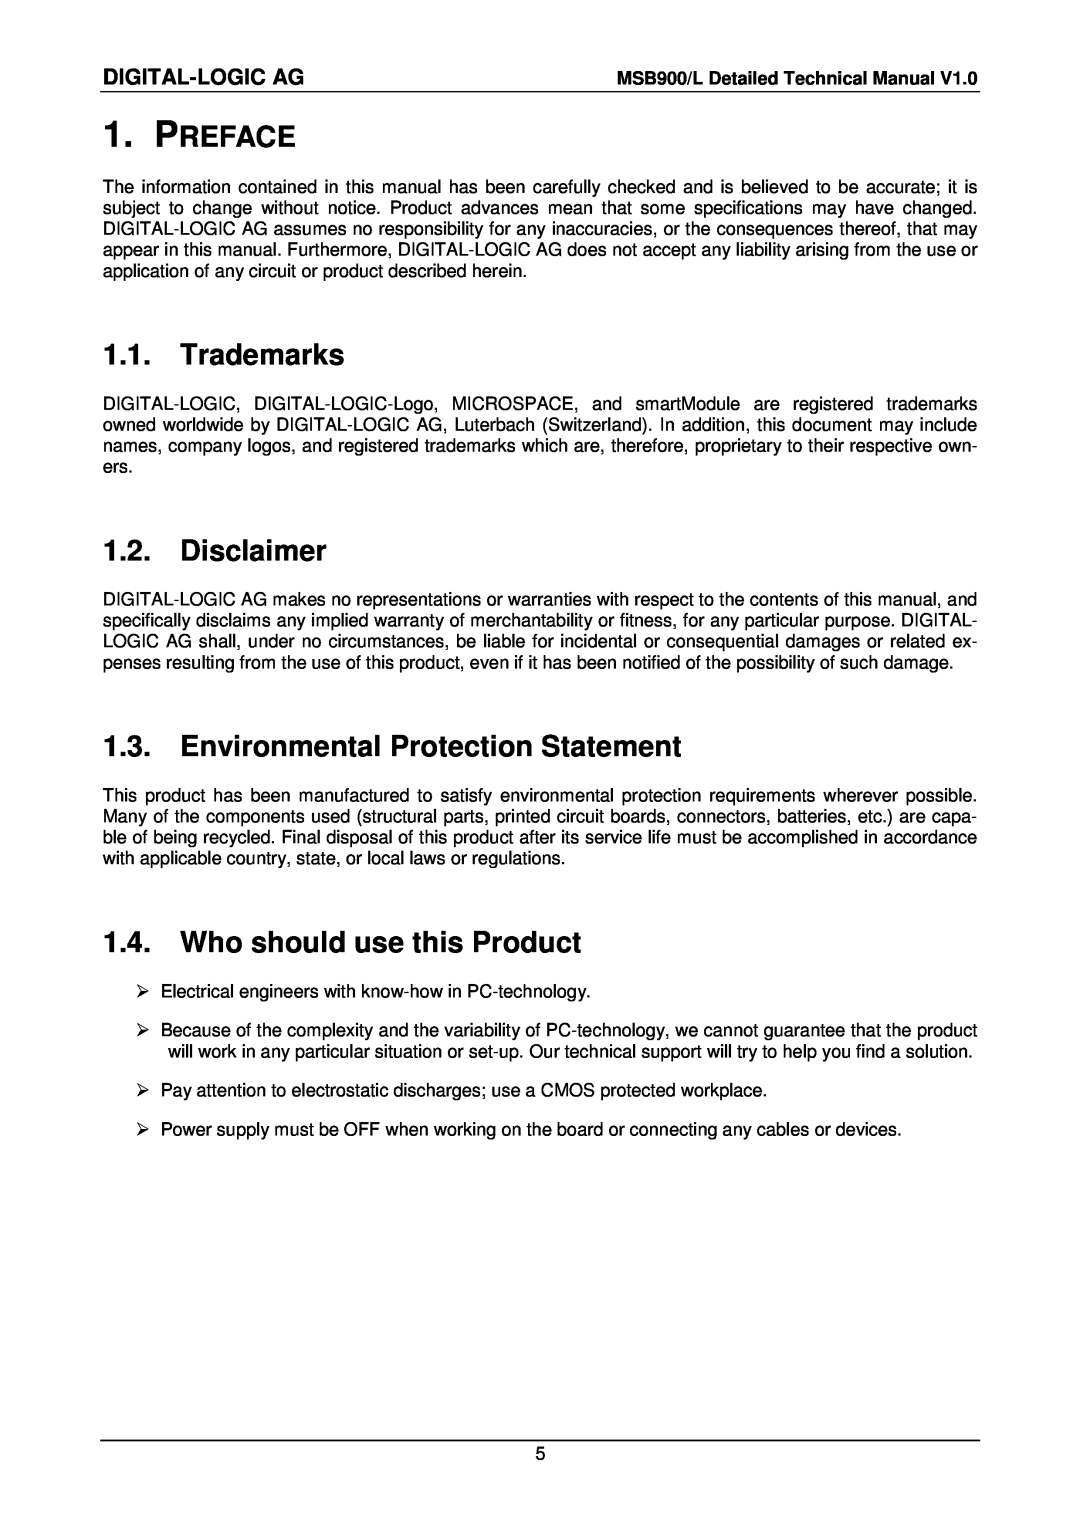 Compaq MSB900L Preface, Trademarks, Disclaimer, Environmental Protection Statement, Who should use this Product 